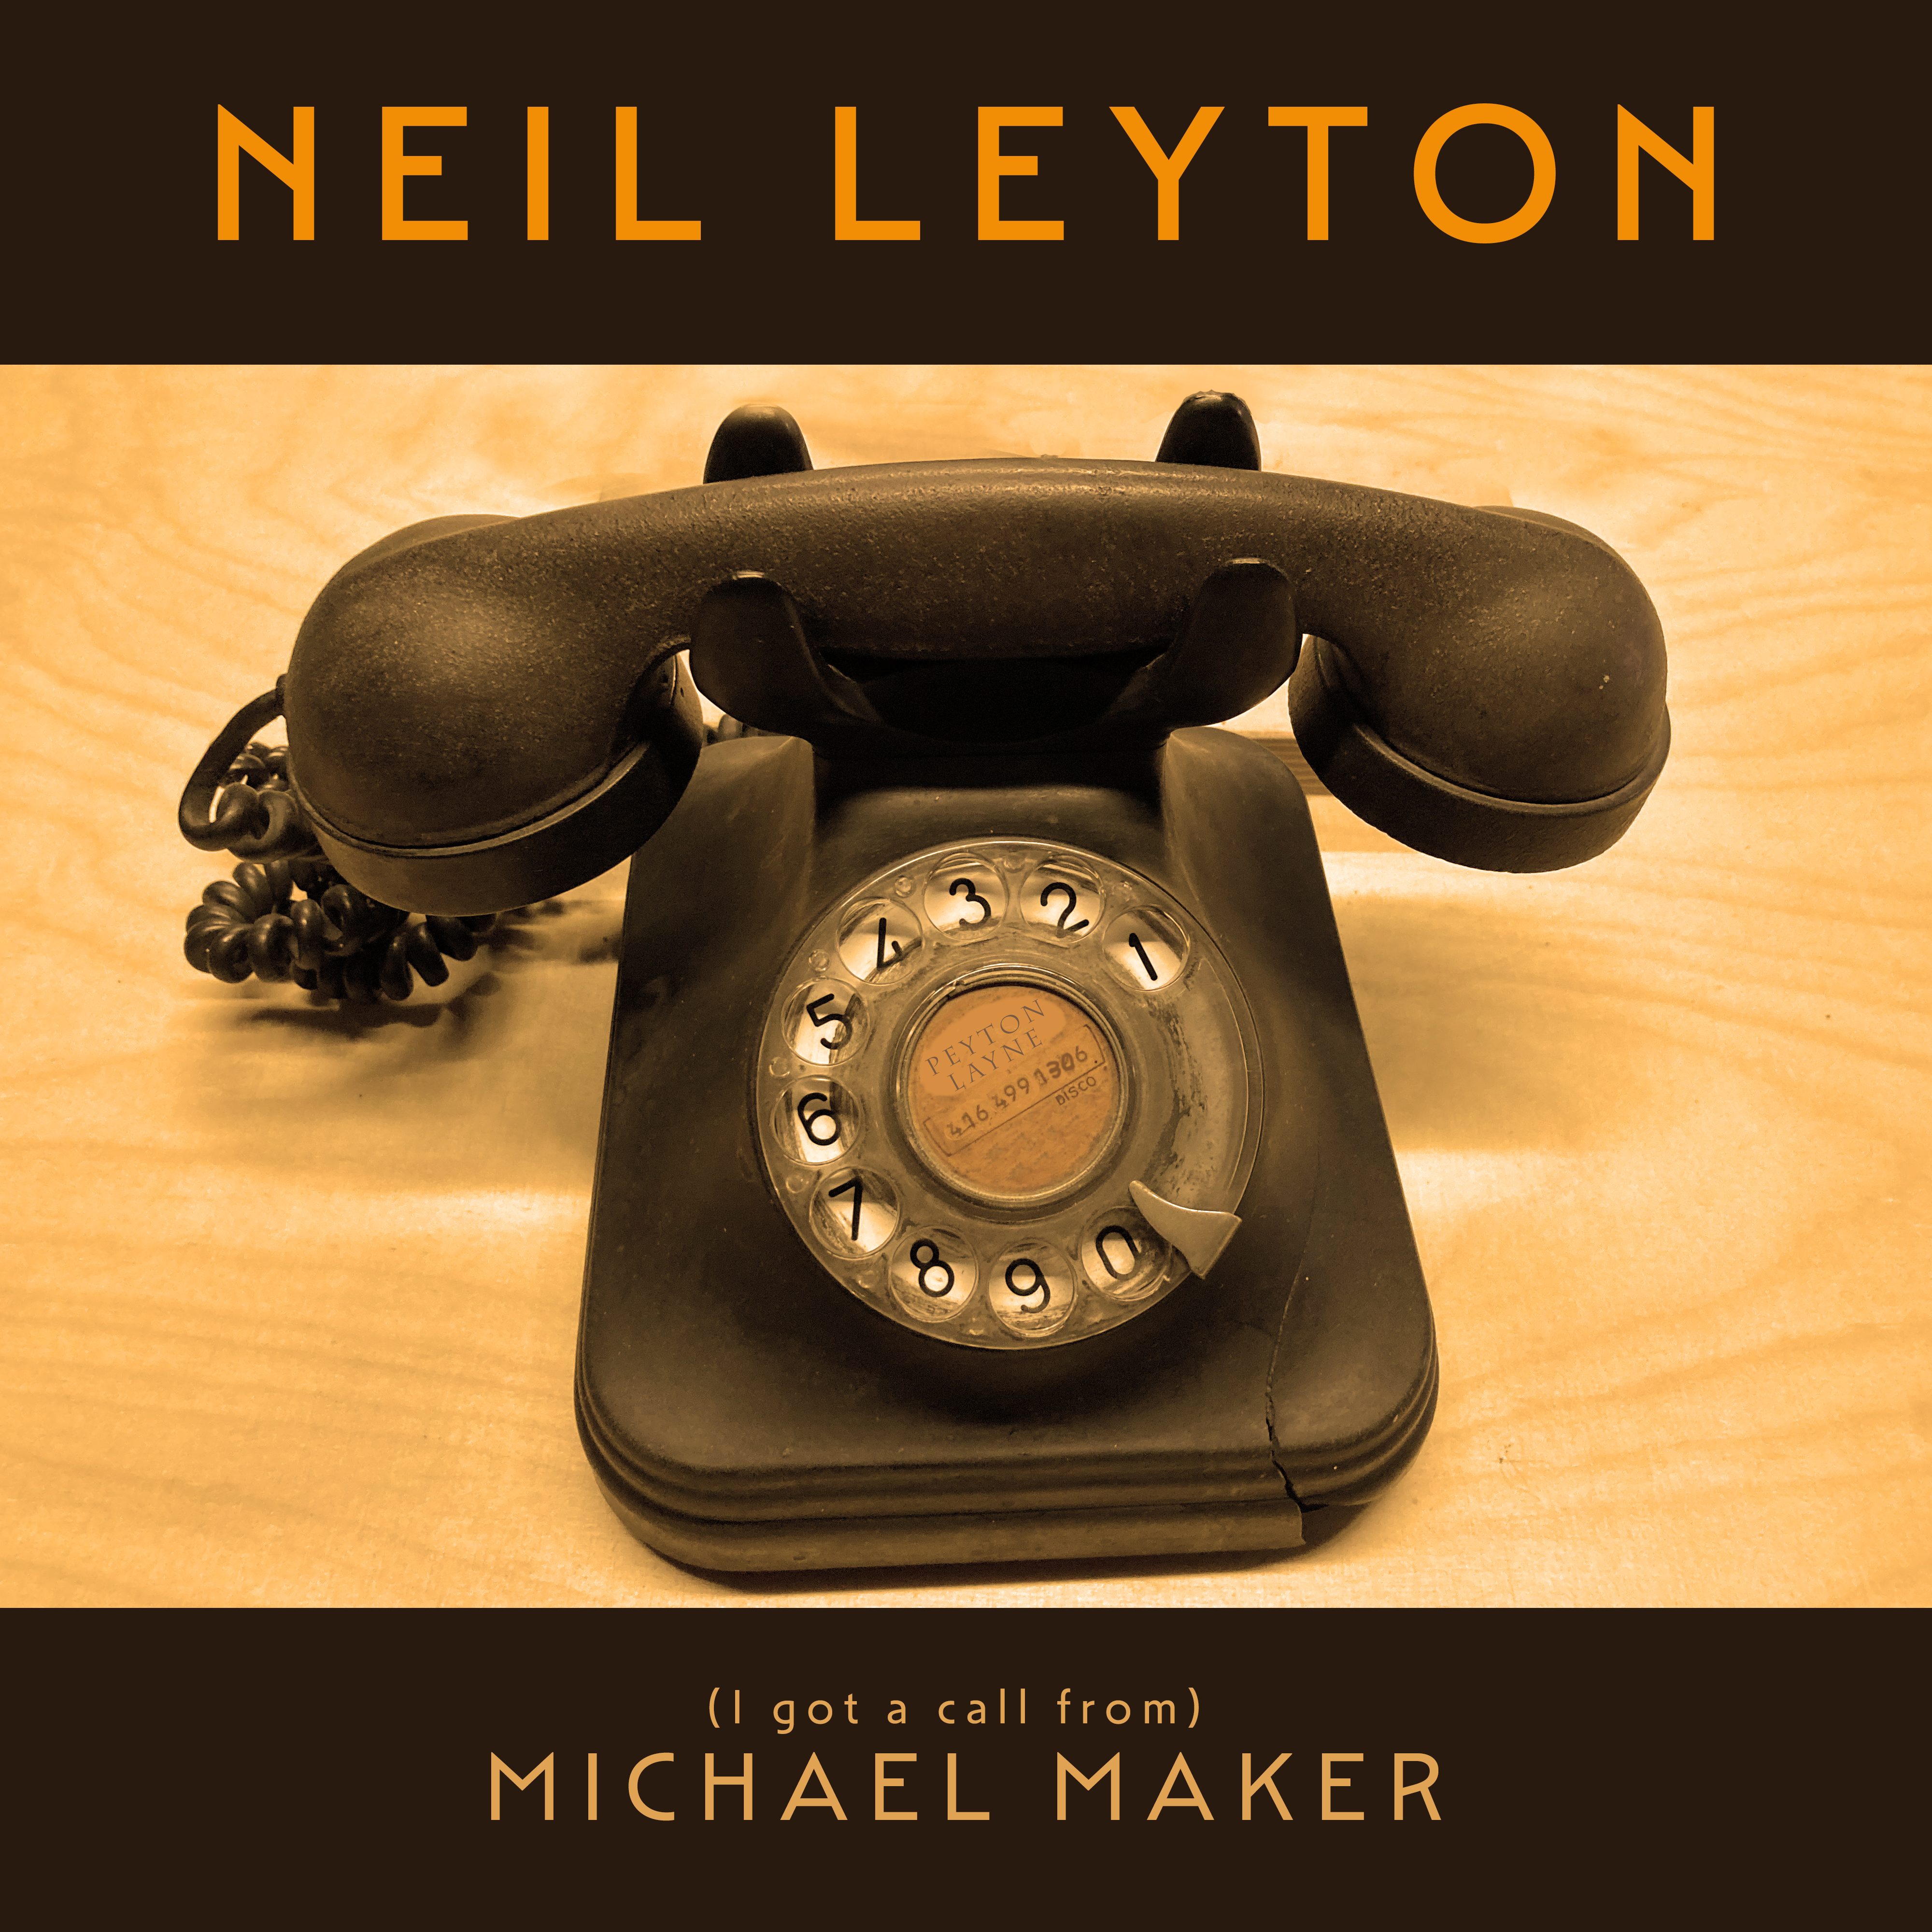 Neil Leyton announces new single, “(I got a call from) Michael Maker”, 12.12.22!